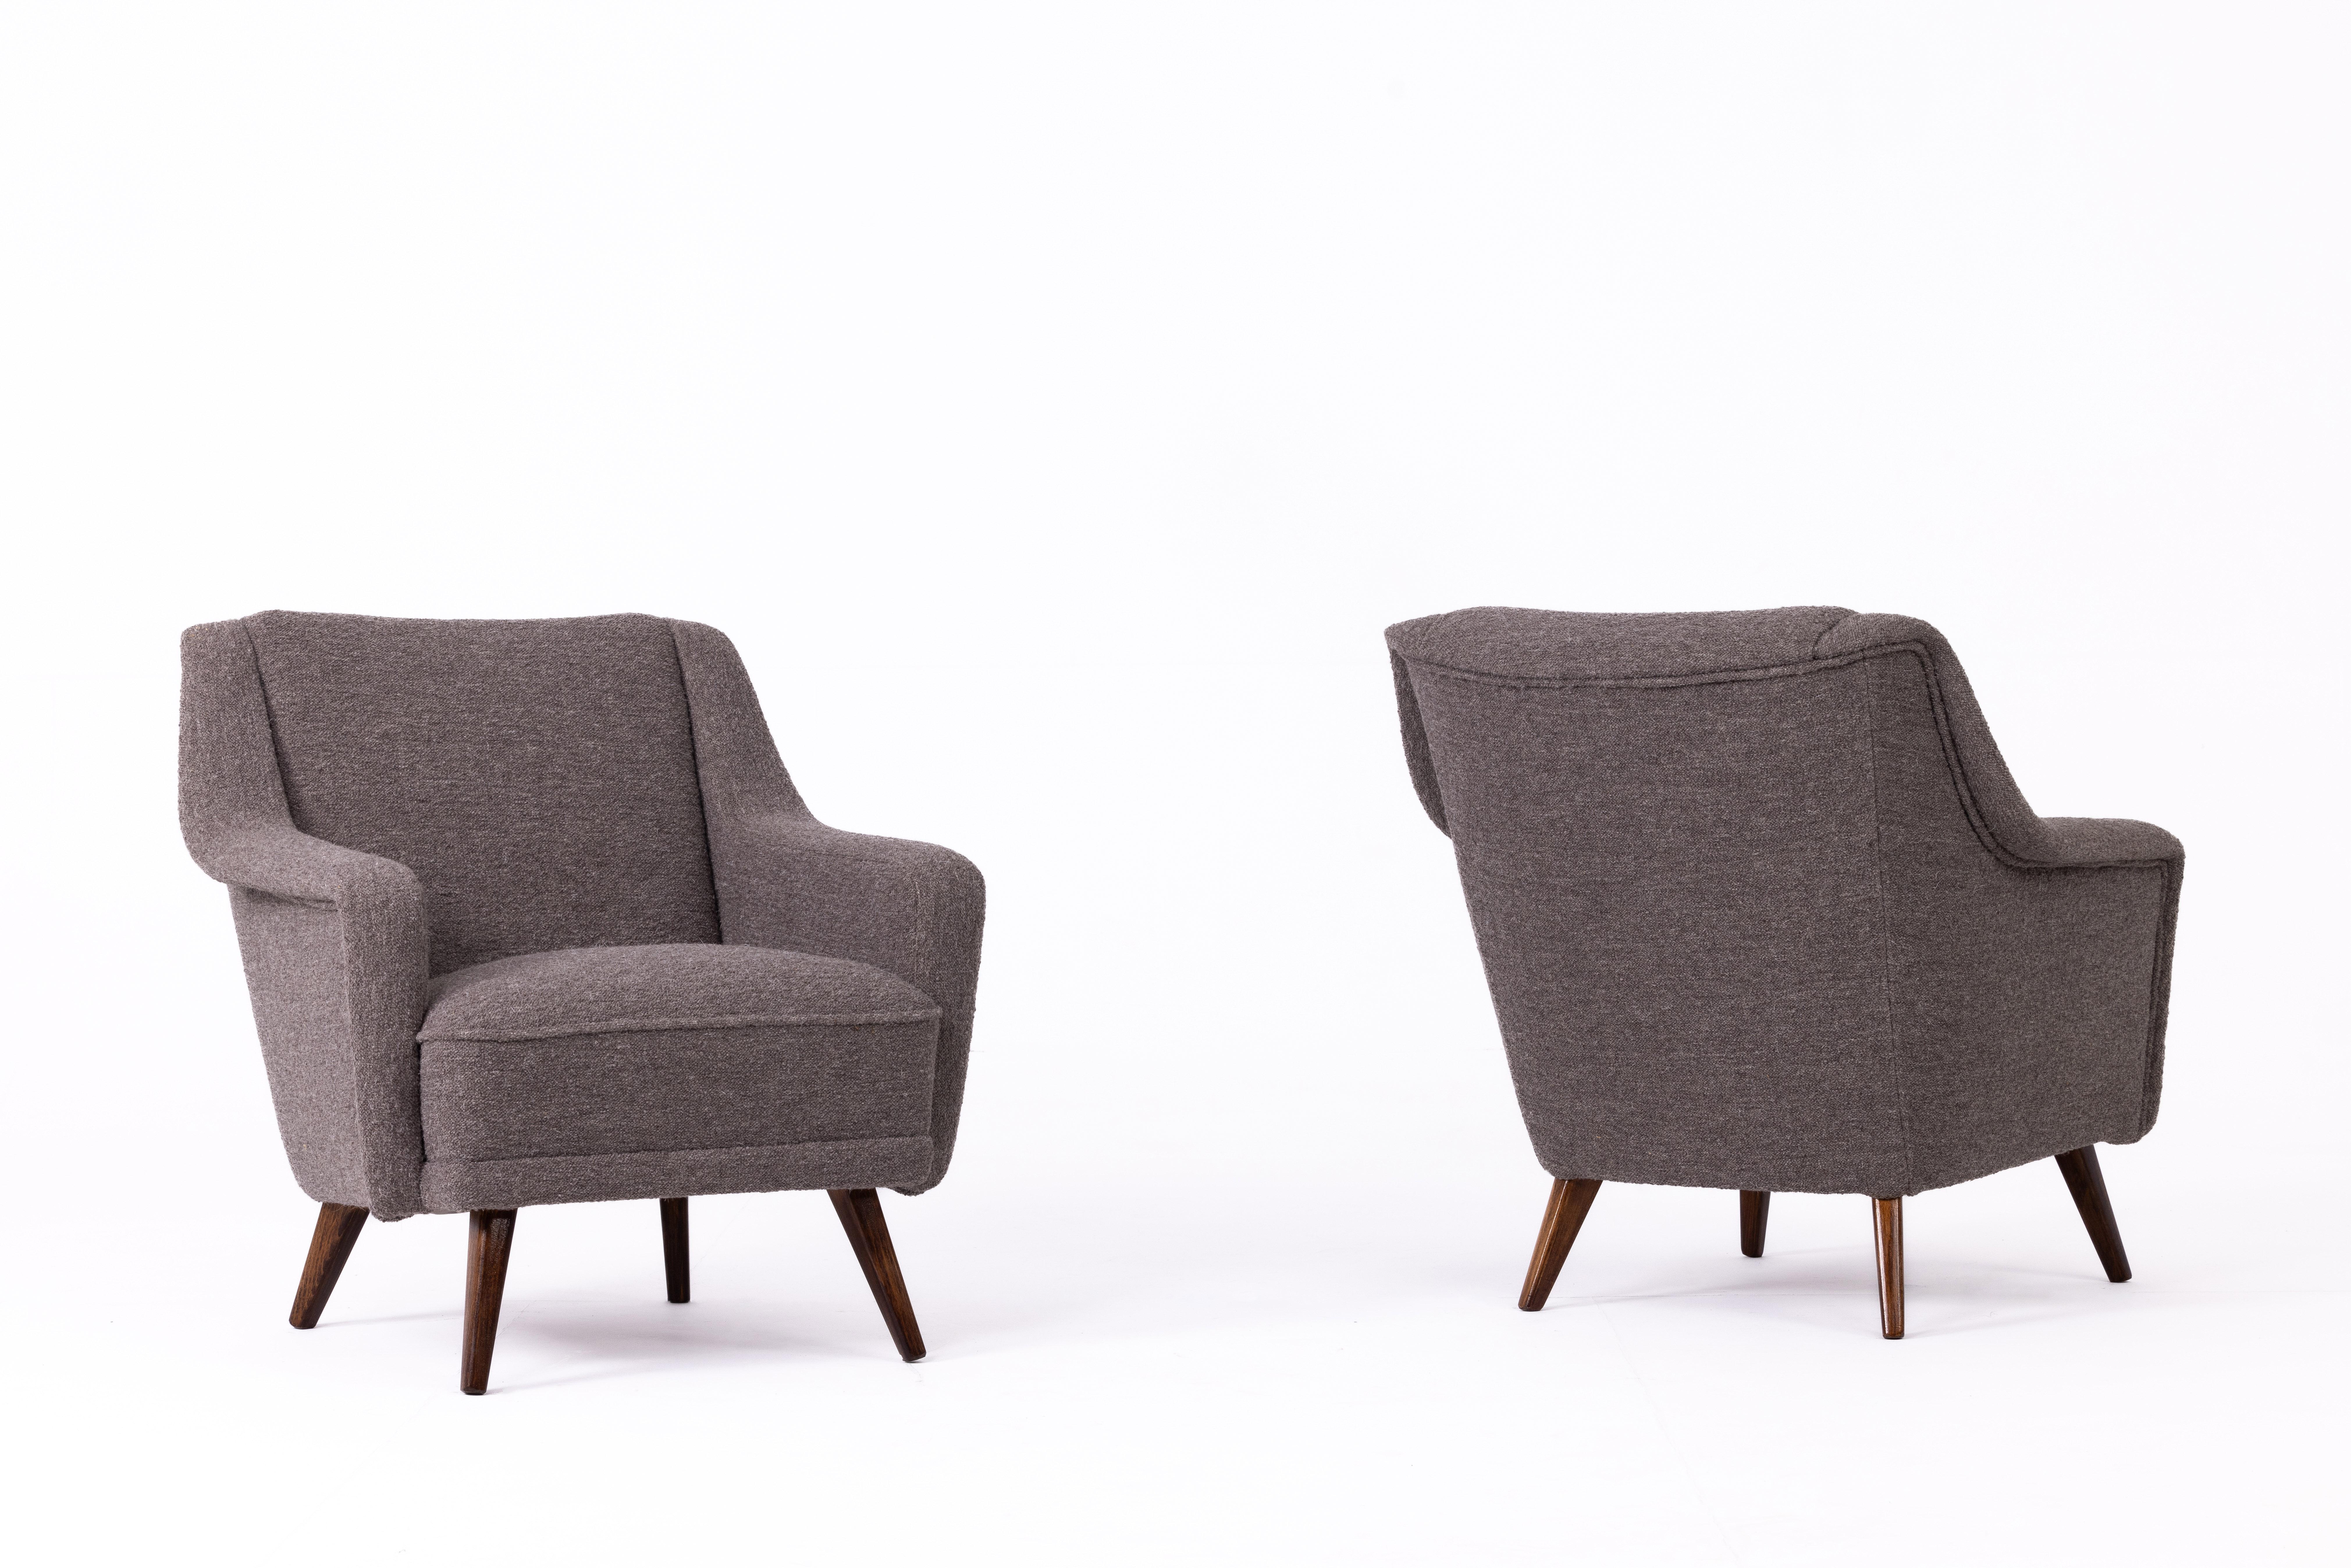 Pair of Mid-century armchairs, Austria 1950s, Newly Reupholstered, Linen Fabric In Good Condition For Sale In Torino, Piemonte